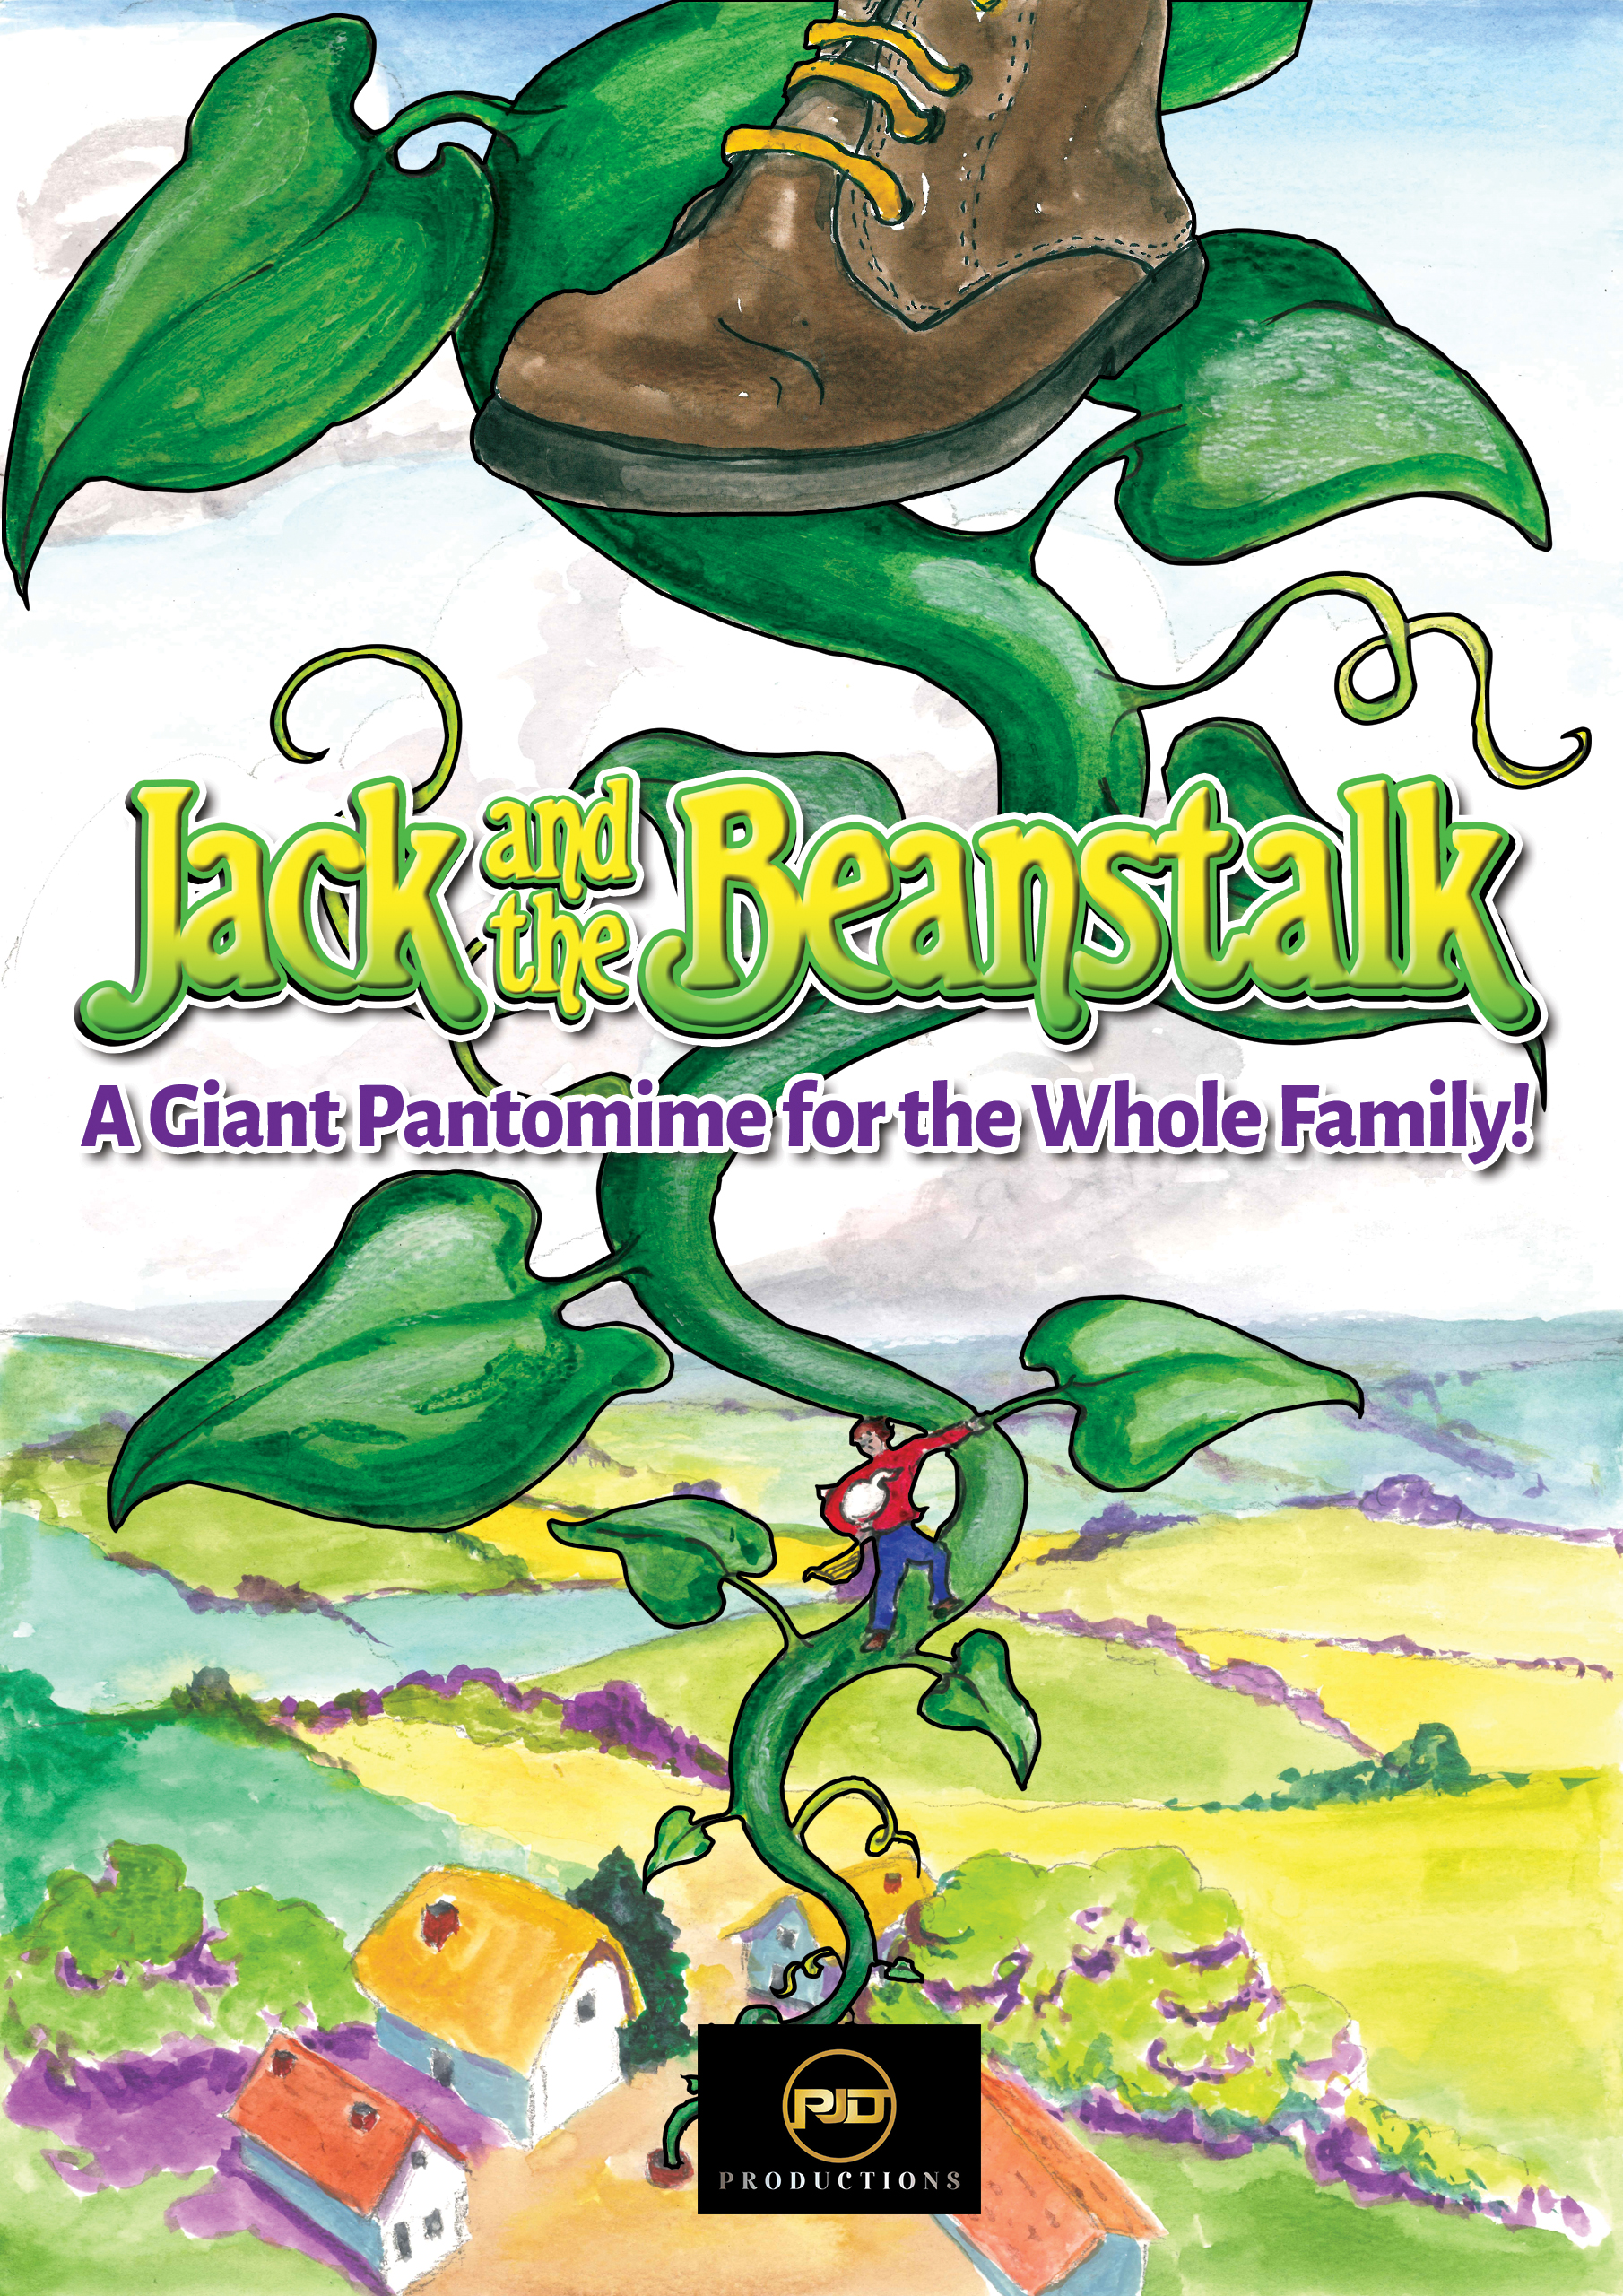 Jack and the Beanstalk panto image